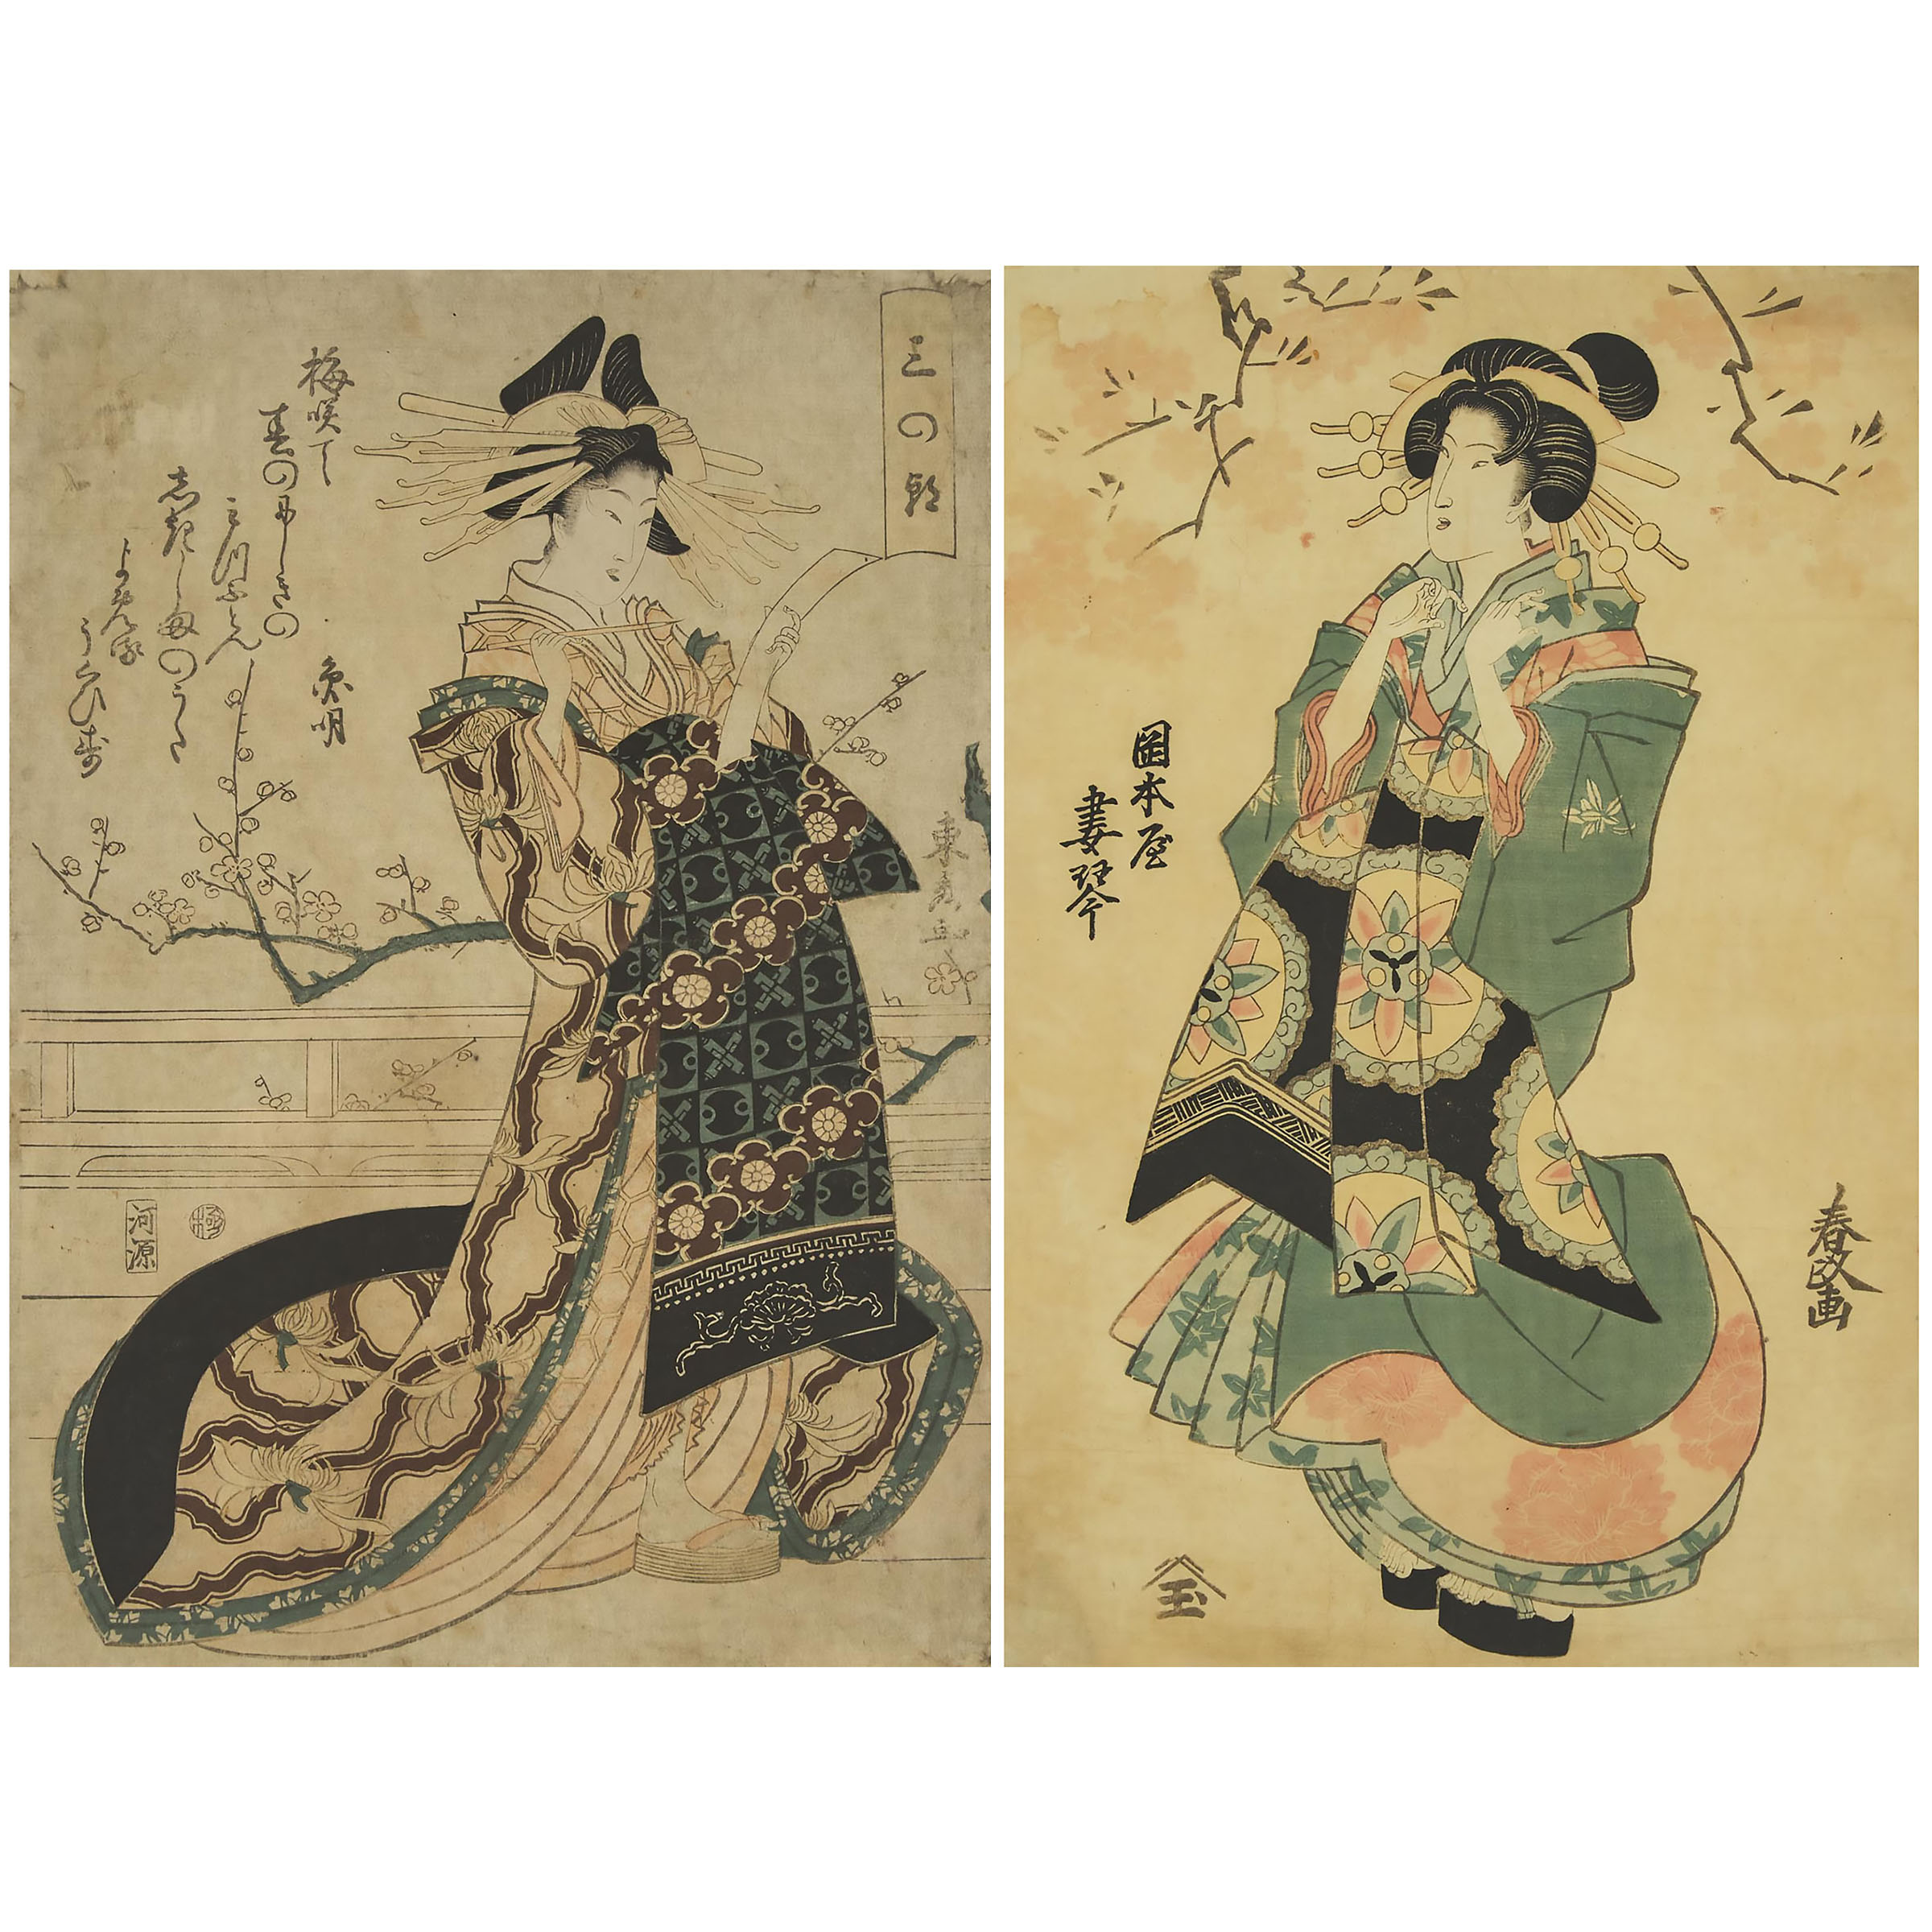 Two Rare Woodblock Prints, Signed Harumasa and Toshu, Early 19th Century